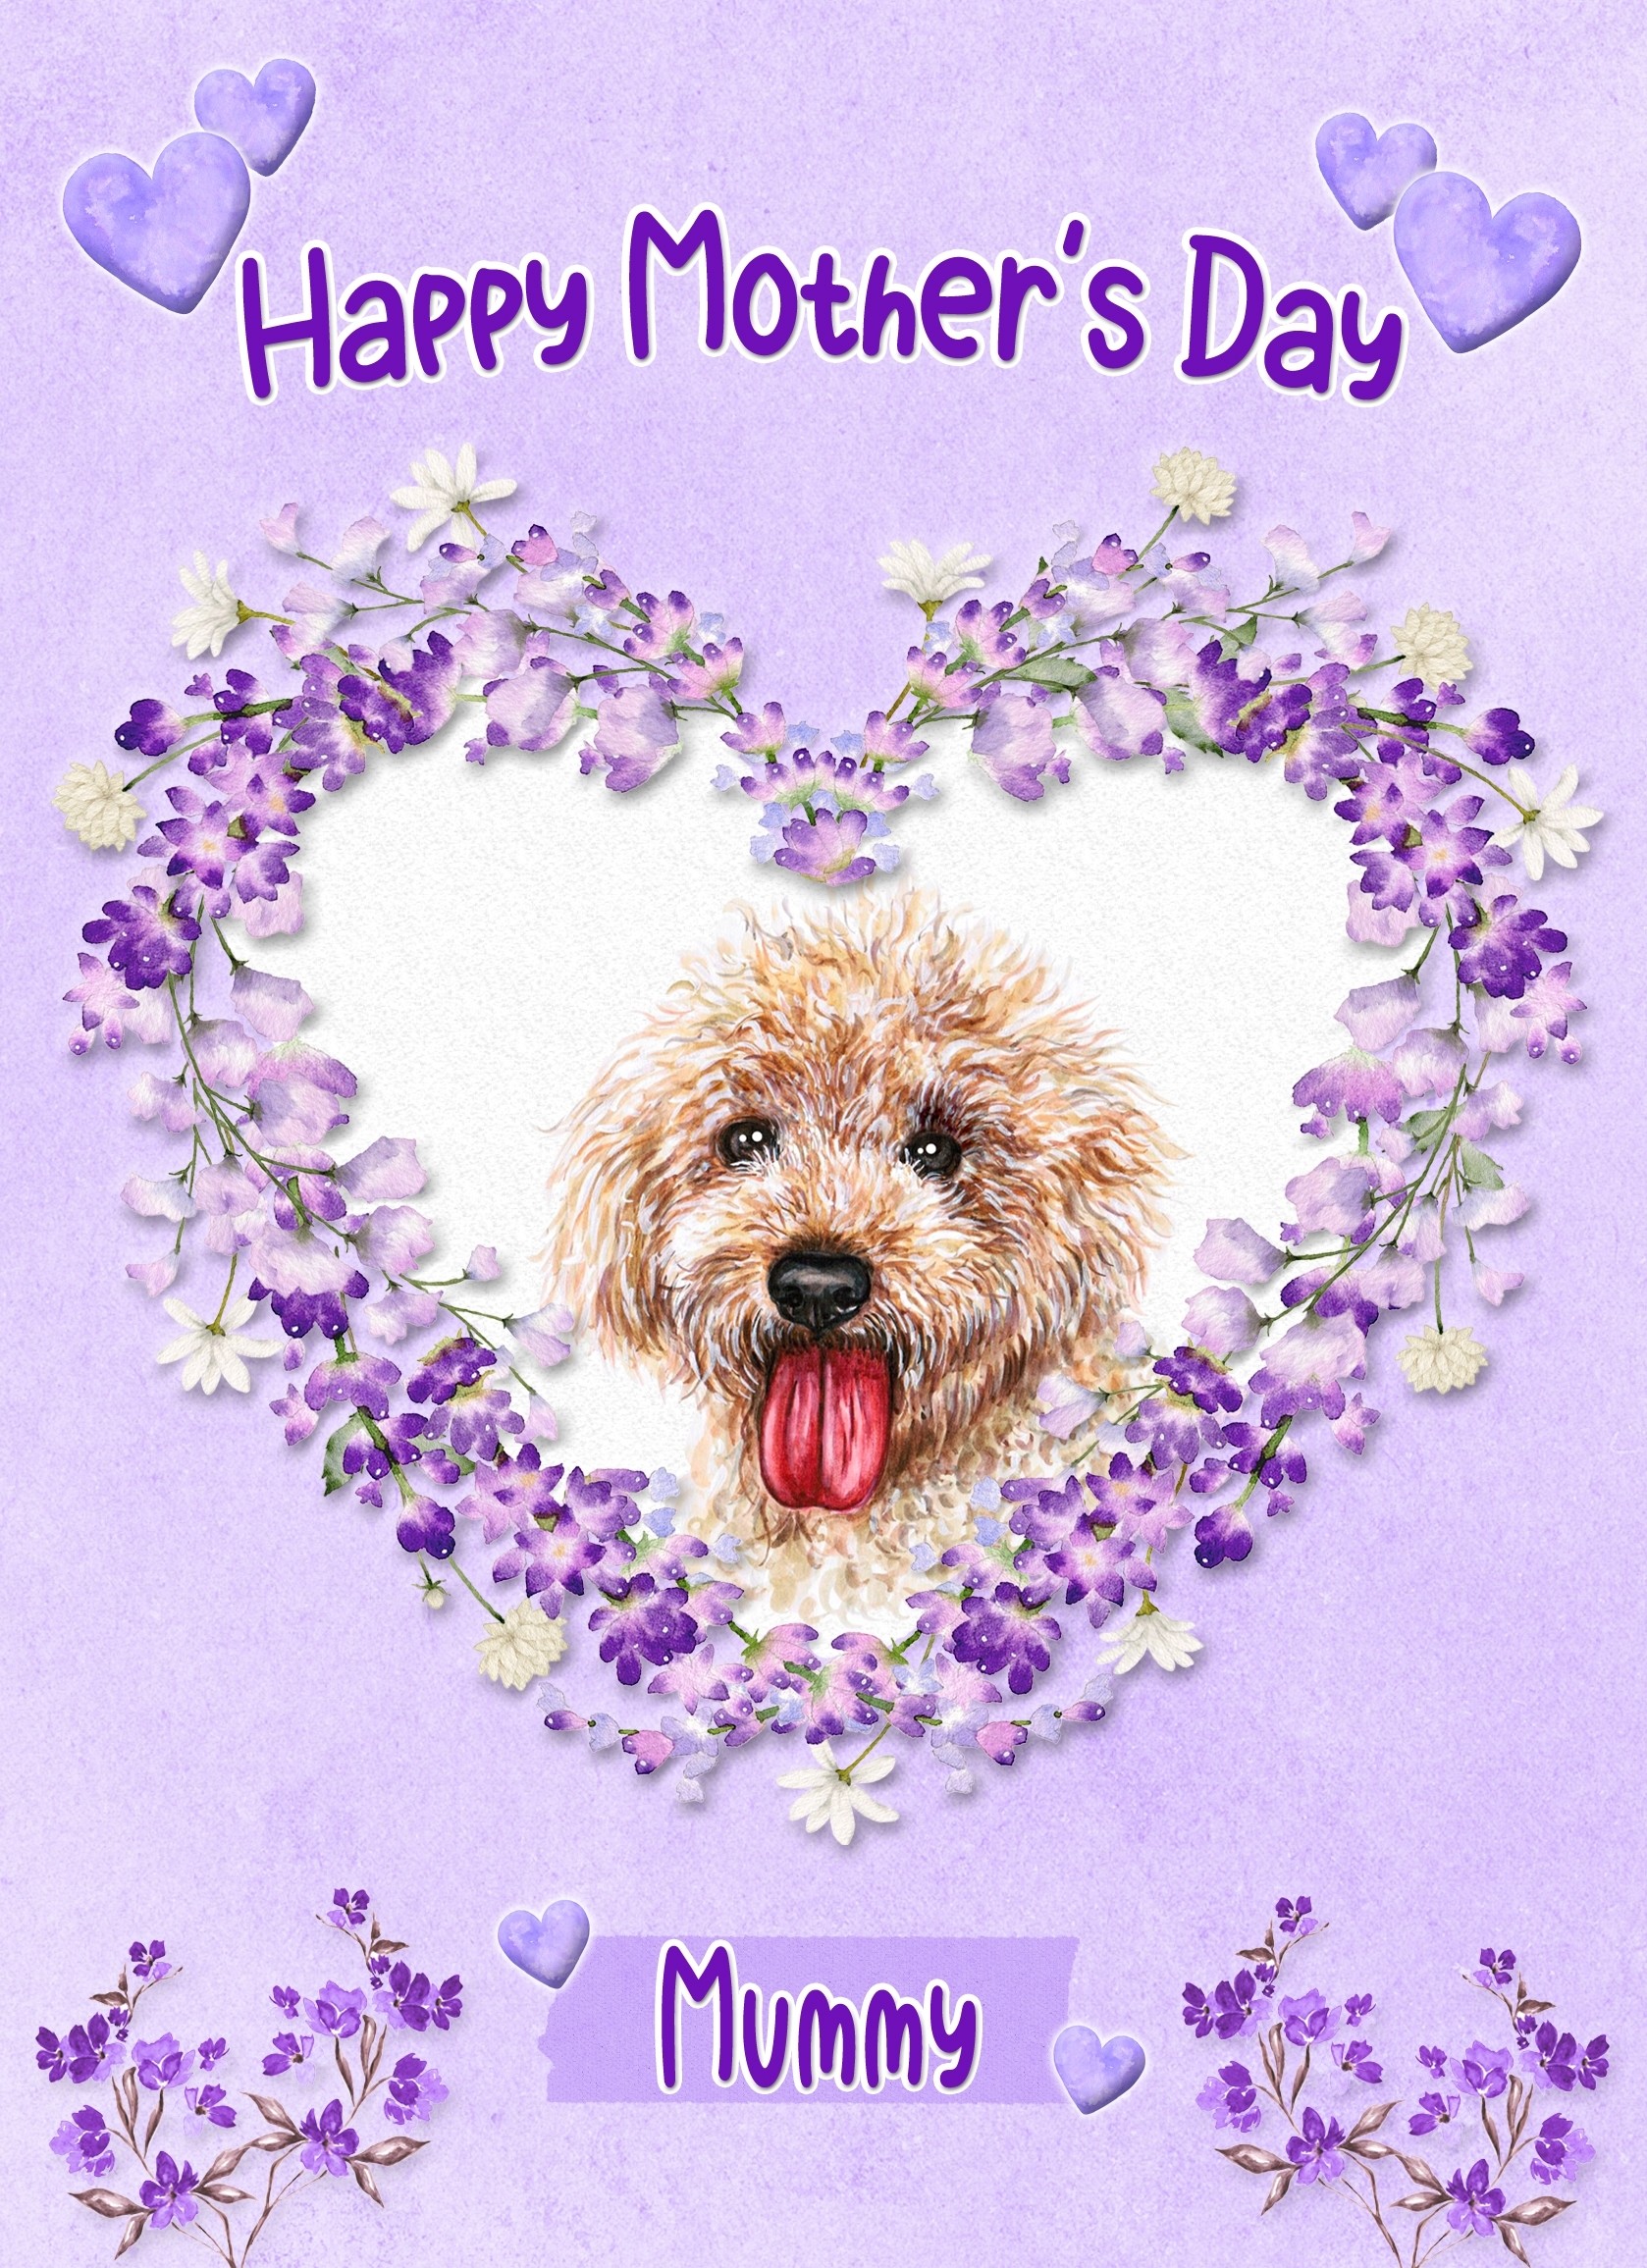 Cockapoo Dog Mothers Day Card (Happy Mothers, Mummy)